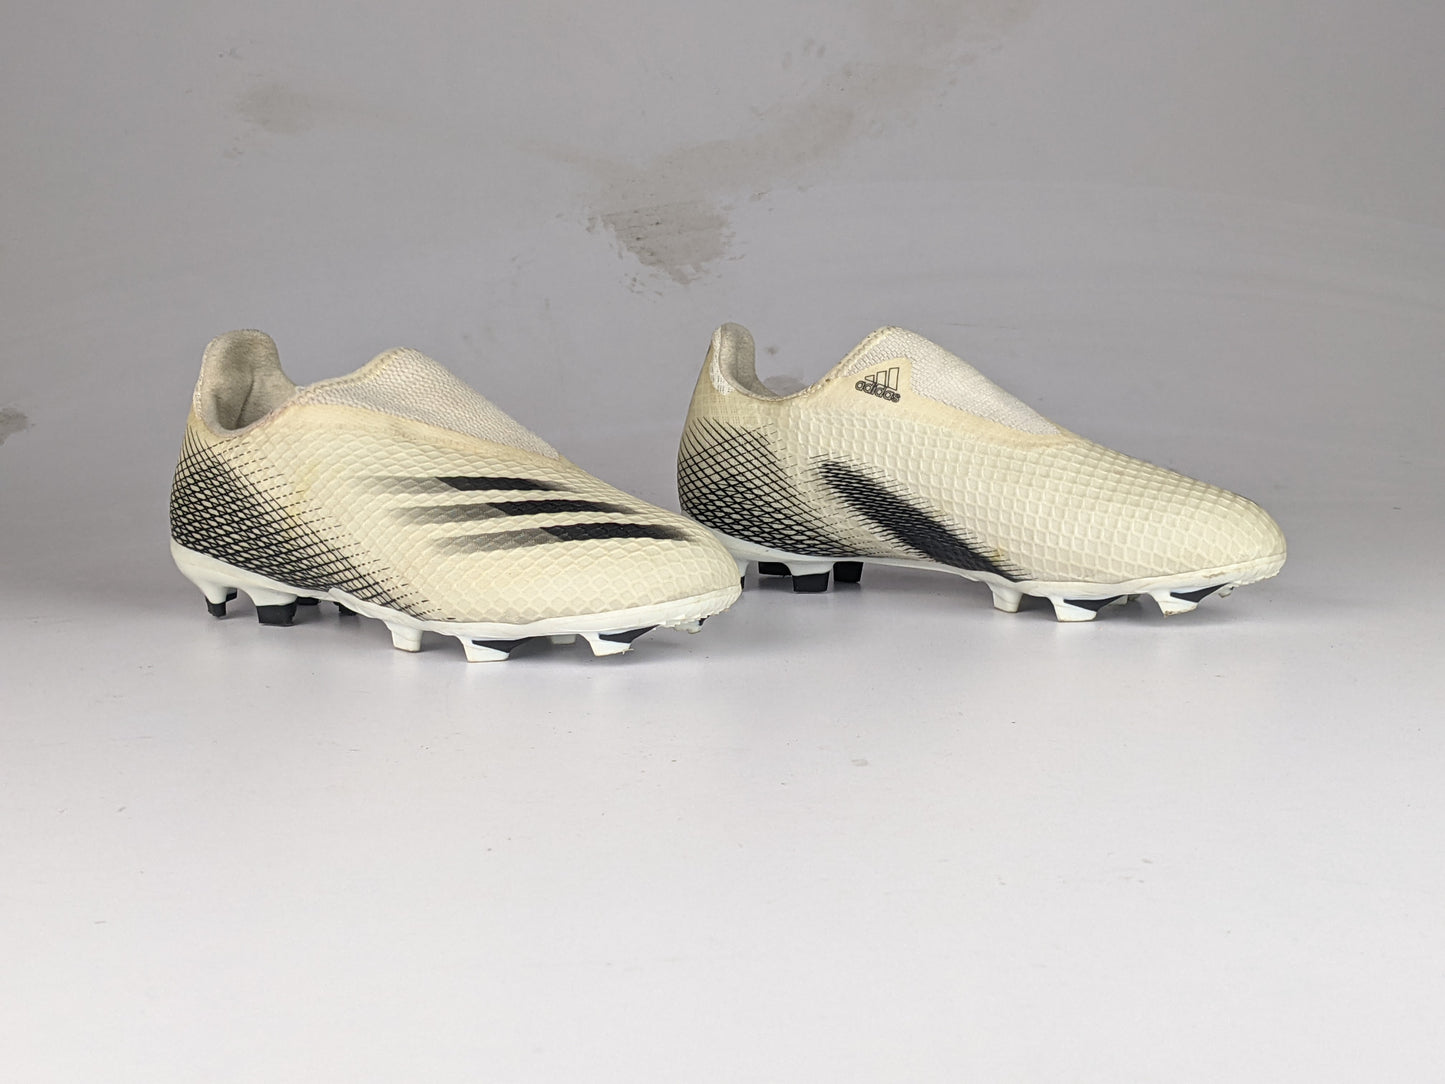 adidas X Ghosted .3 Laceless FG/AG Inflight - Footwear White/Core Black/Silver Metallic Kids